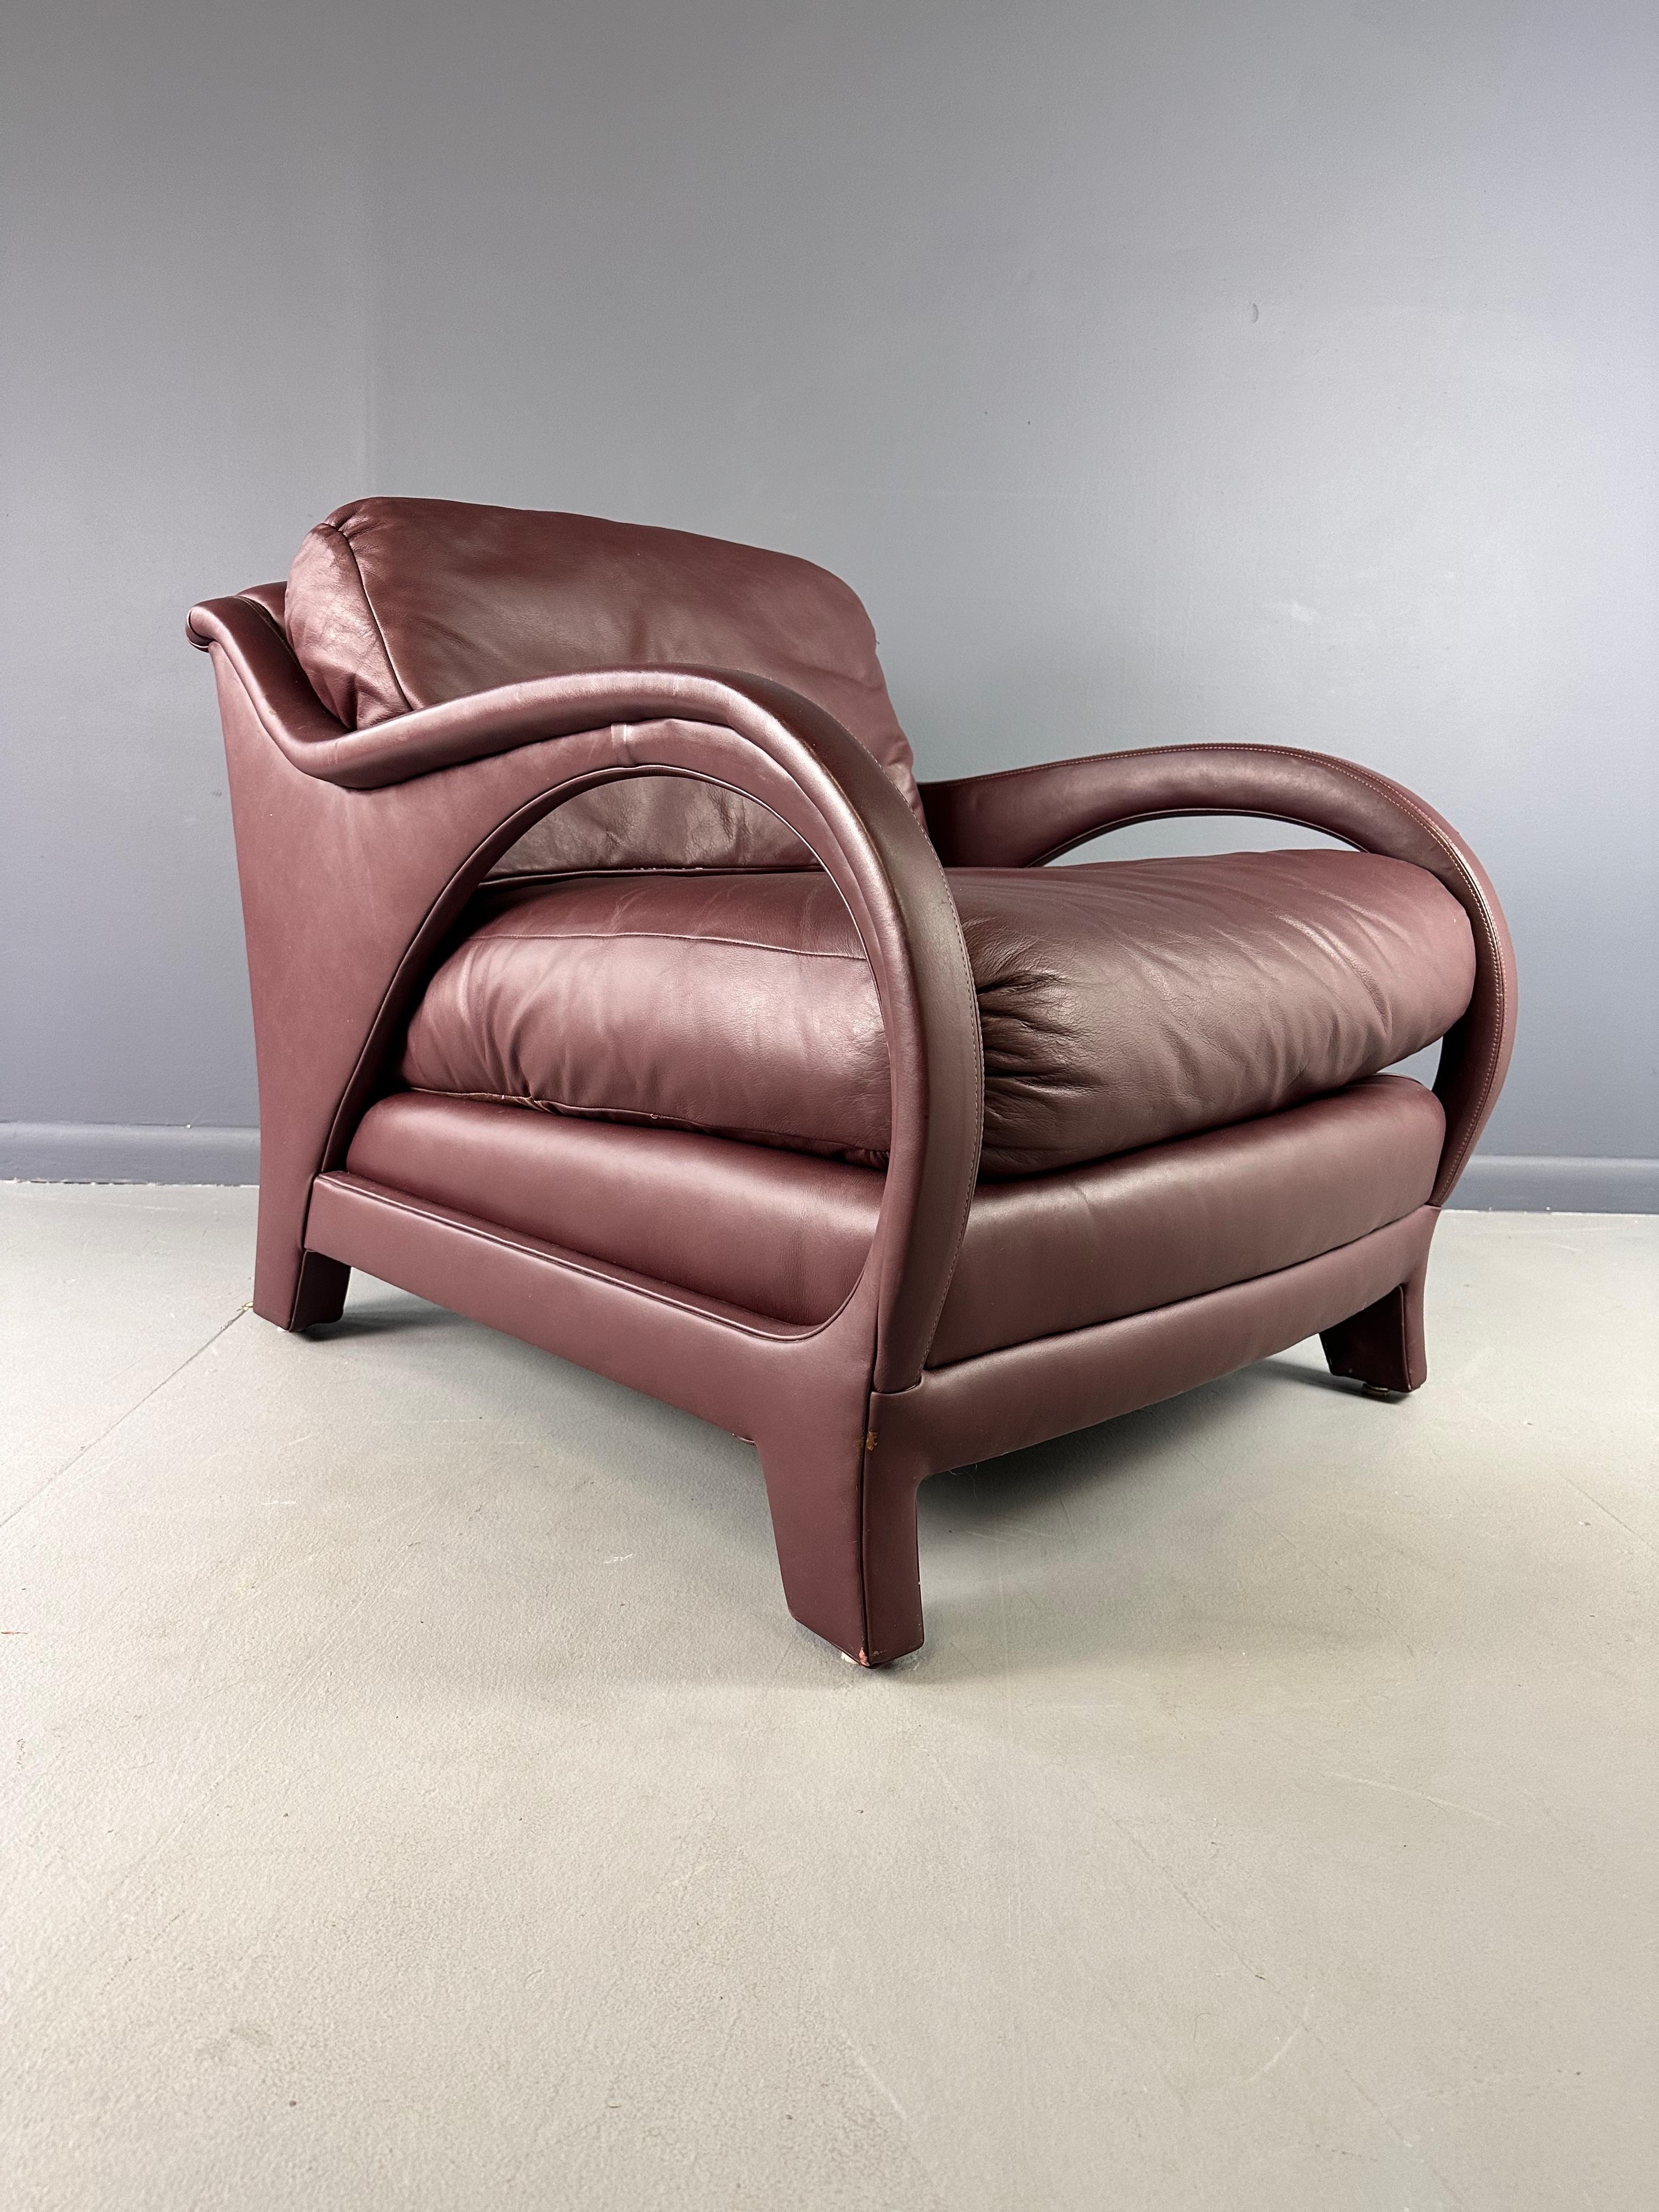 This Jay Spectre Tycoon Leather Lounge Chair in Burgundy is the perfect addition to any upscale living or office space. Crafted by renowned designer Jay Spectre, this chair offers a luxurious and sleek design, featuring high-quality leather and a